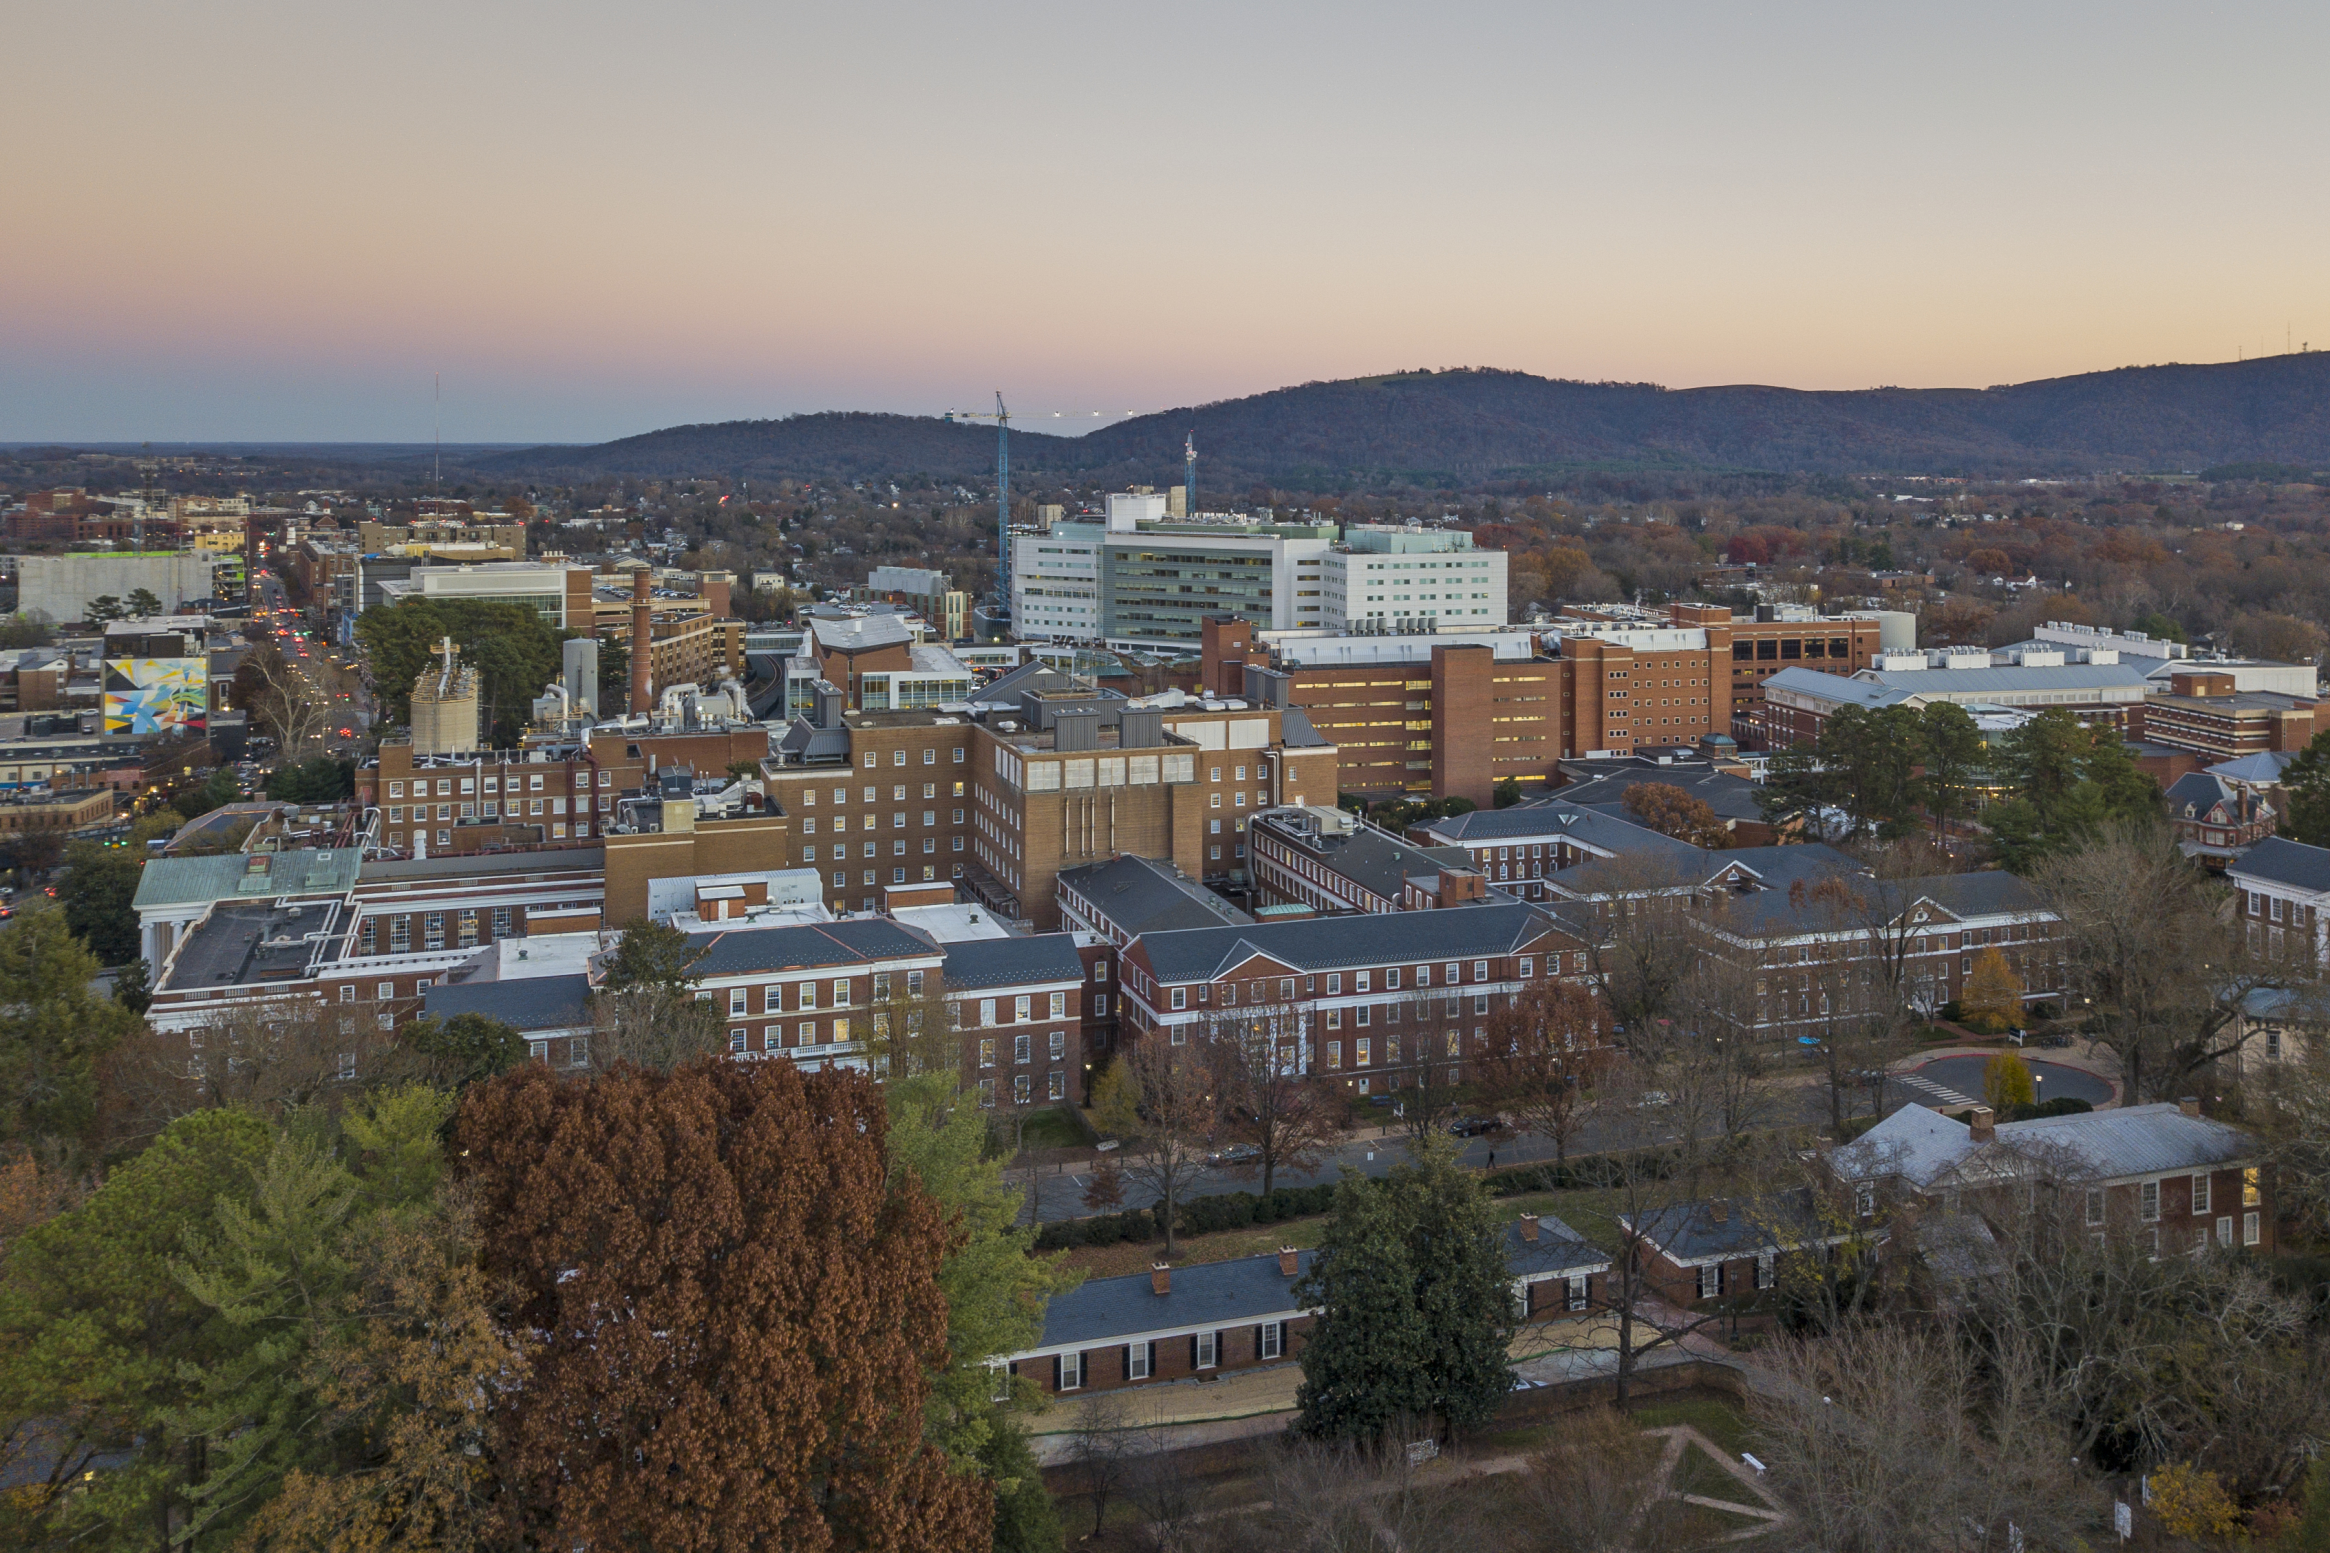 Aerial view of the UVA Health Center Buildings